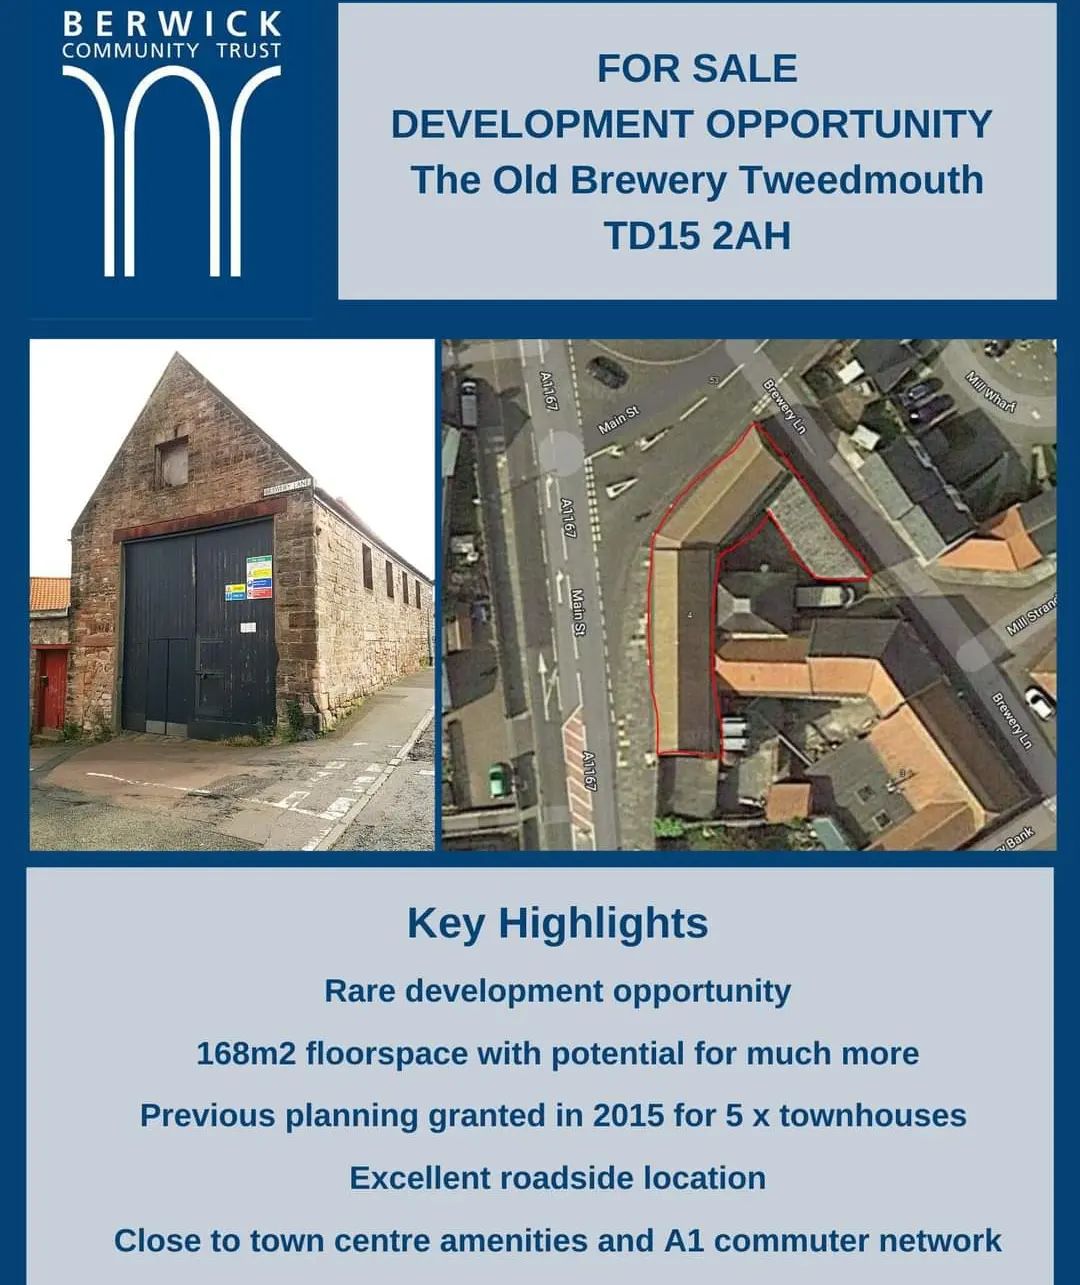 Viewing by appointment only. 

Full brochure now available. Email juliekennedy@berwicktrust.org.uk to register your interest. #businessdevelopment #forsale